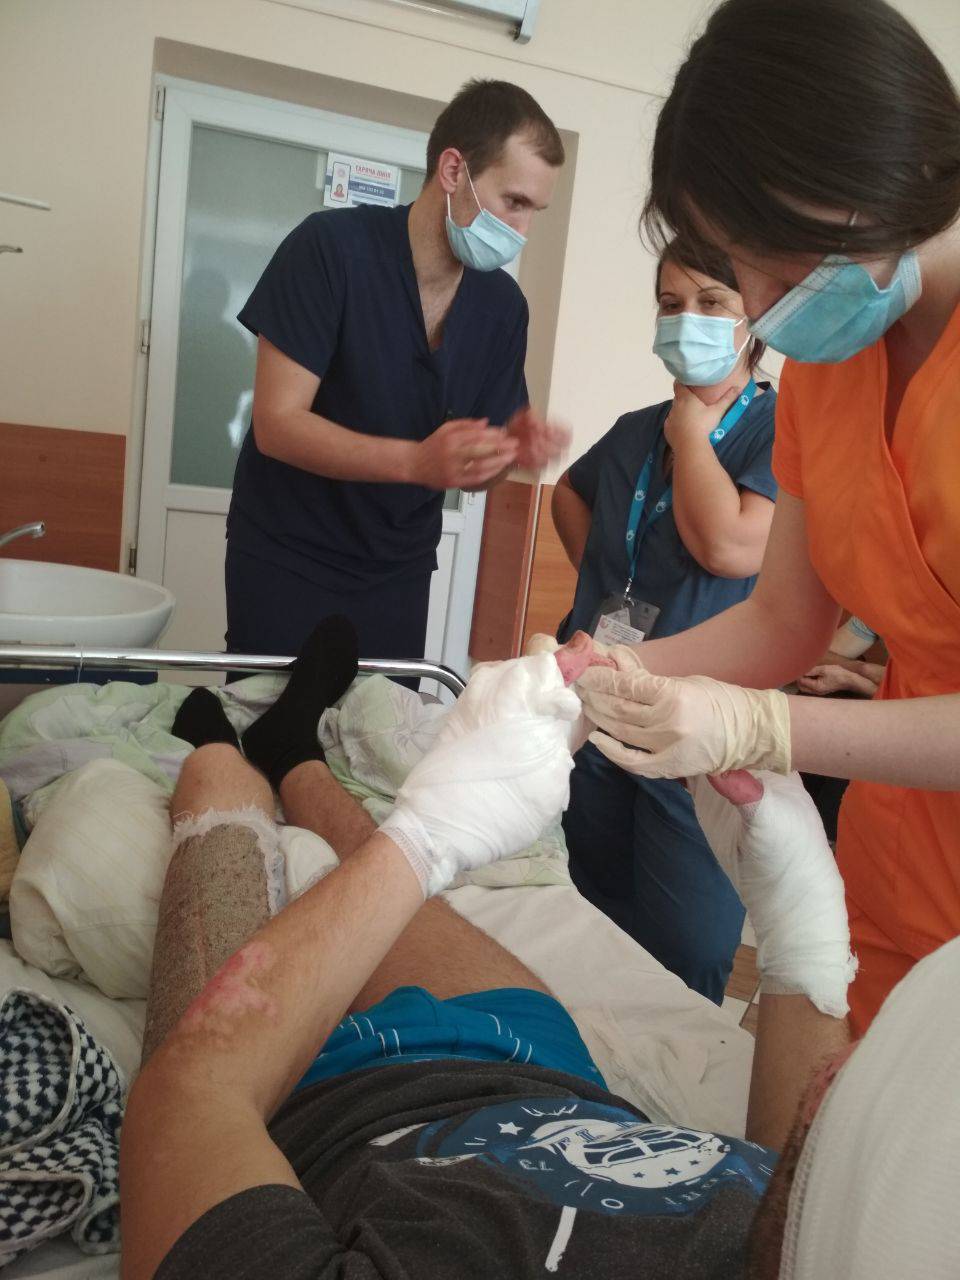 In Lviv, Virginie Duclos provides specialized training to care for a patient burned by explosive weapons in the ongoing conflict. © HI